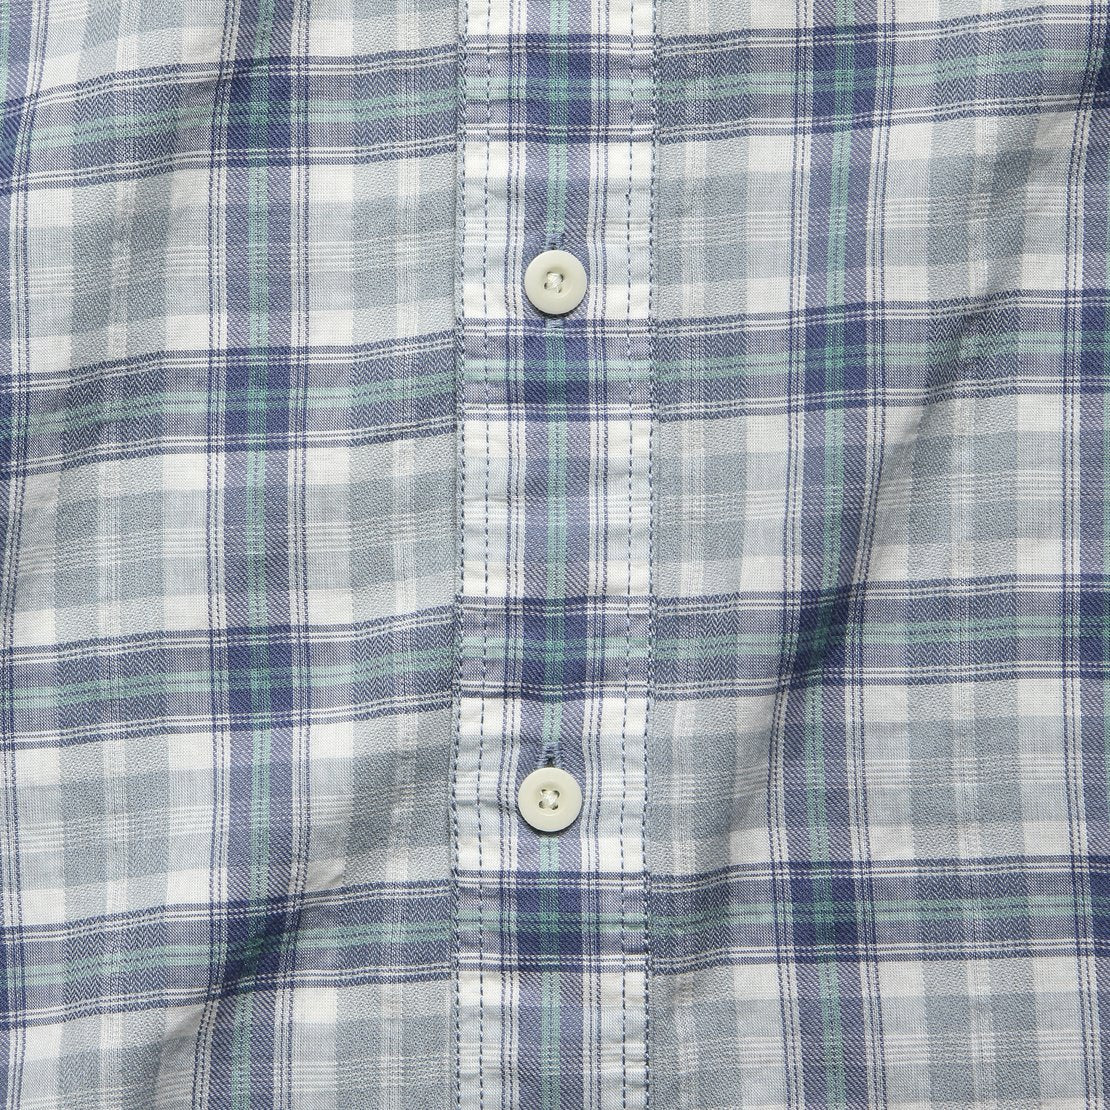 Everyday Shirt - Acadia Plaid - Faherty - STAG Provisions - Tops - L/S Woven - Plaid